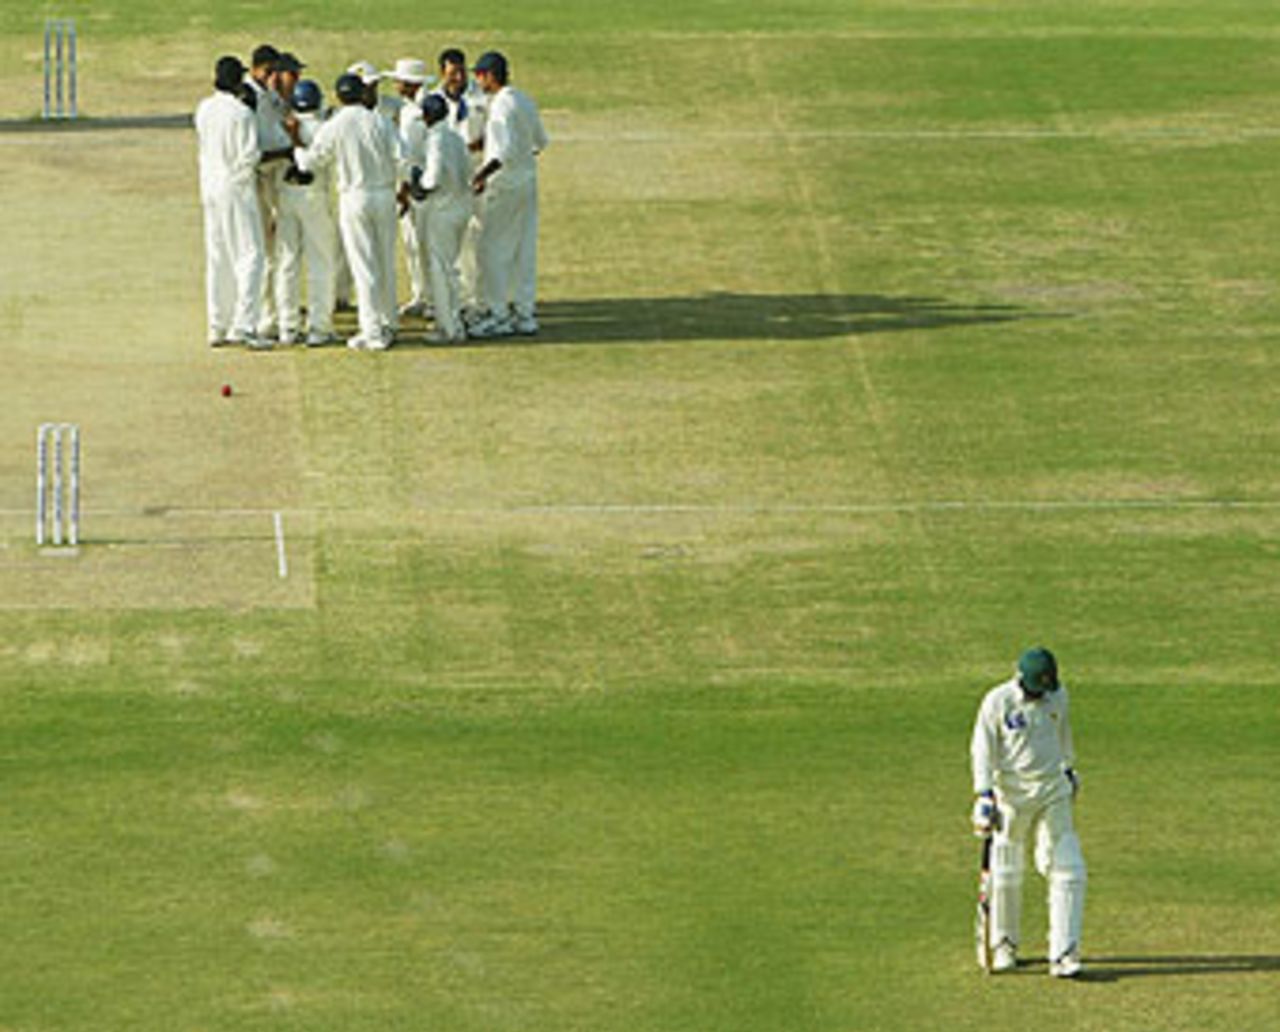 India, on the verge of their first Test win in Pakistan, Pakistan v India, 1st Test, Multan, 4th day, March 31, 2004